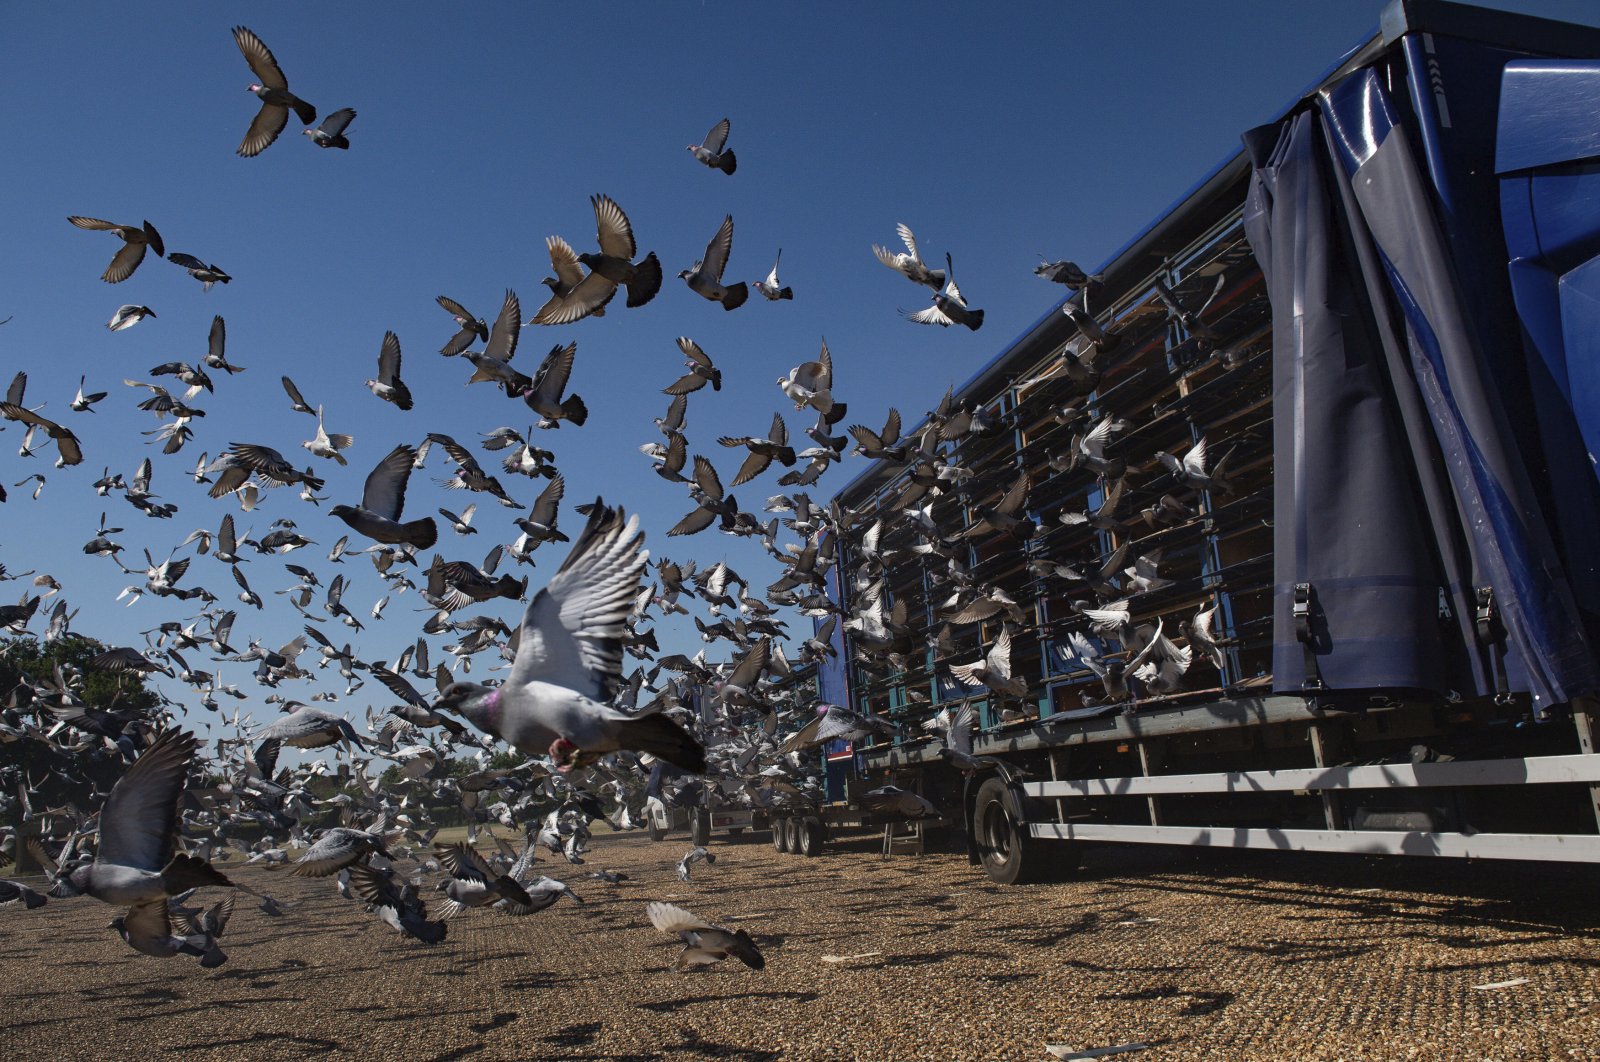 4,465 pigeons belonging to members of the Barnsley Federation of Racing Pigeons are released at Wicksteed Park in Kettering, Northamptonshire, England, June 1, 2020. (AP Photo) 